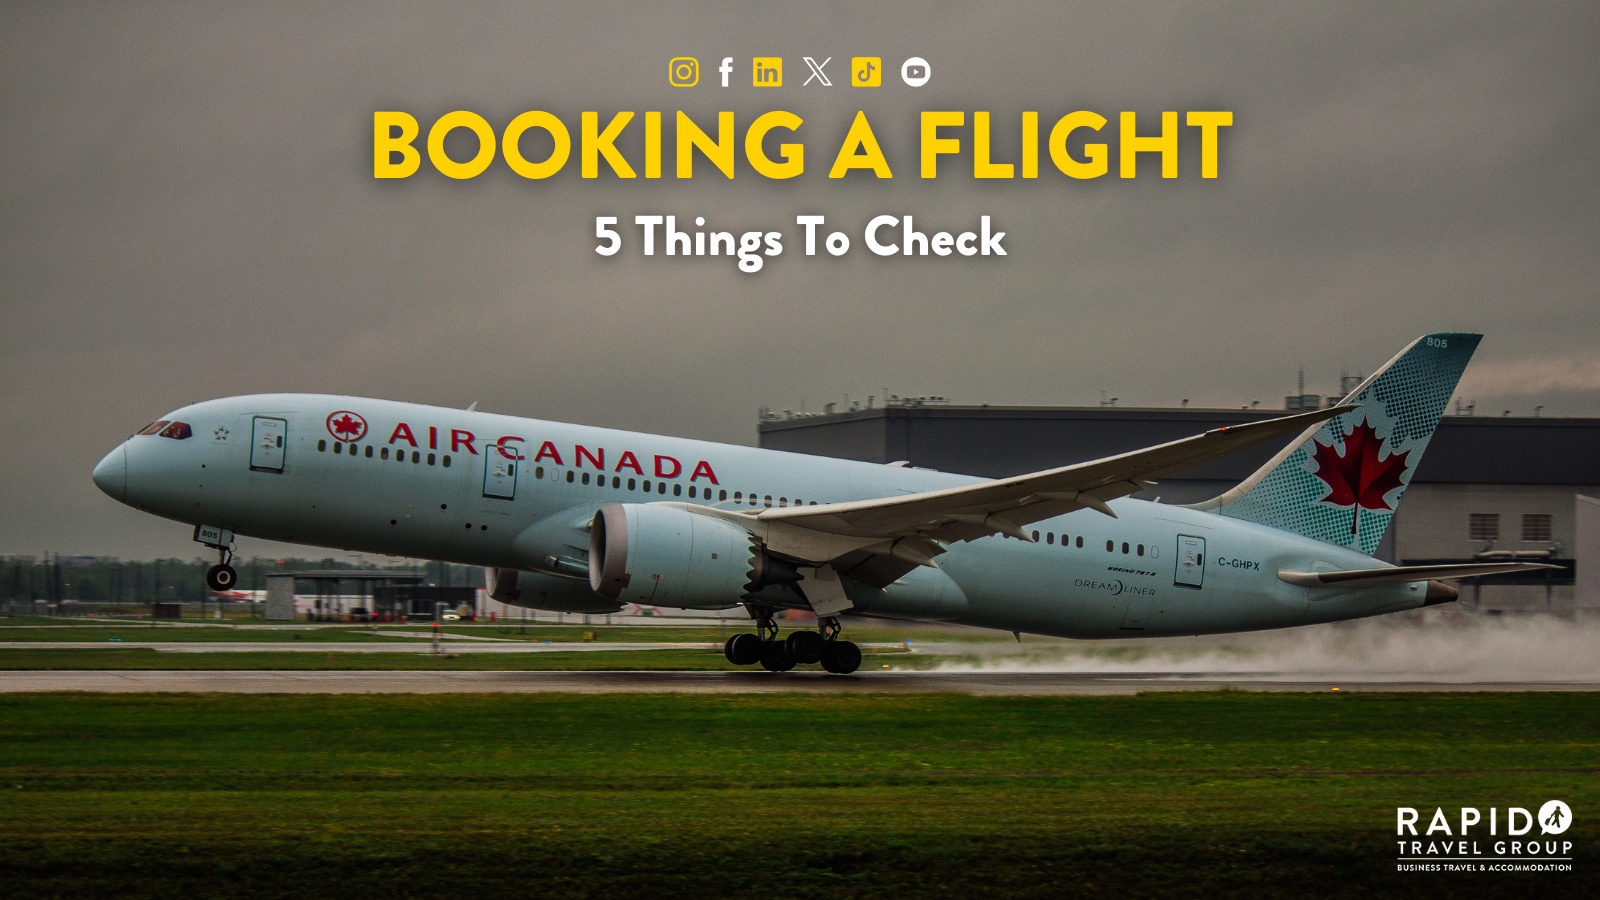 Booking A Flight: Things To Check